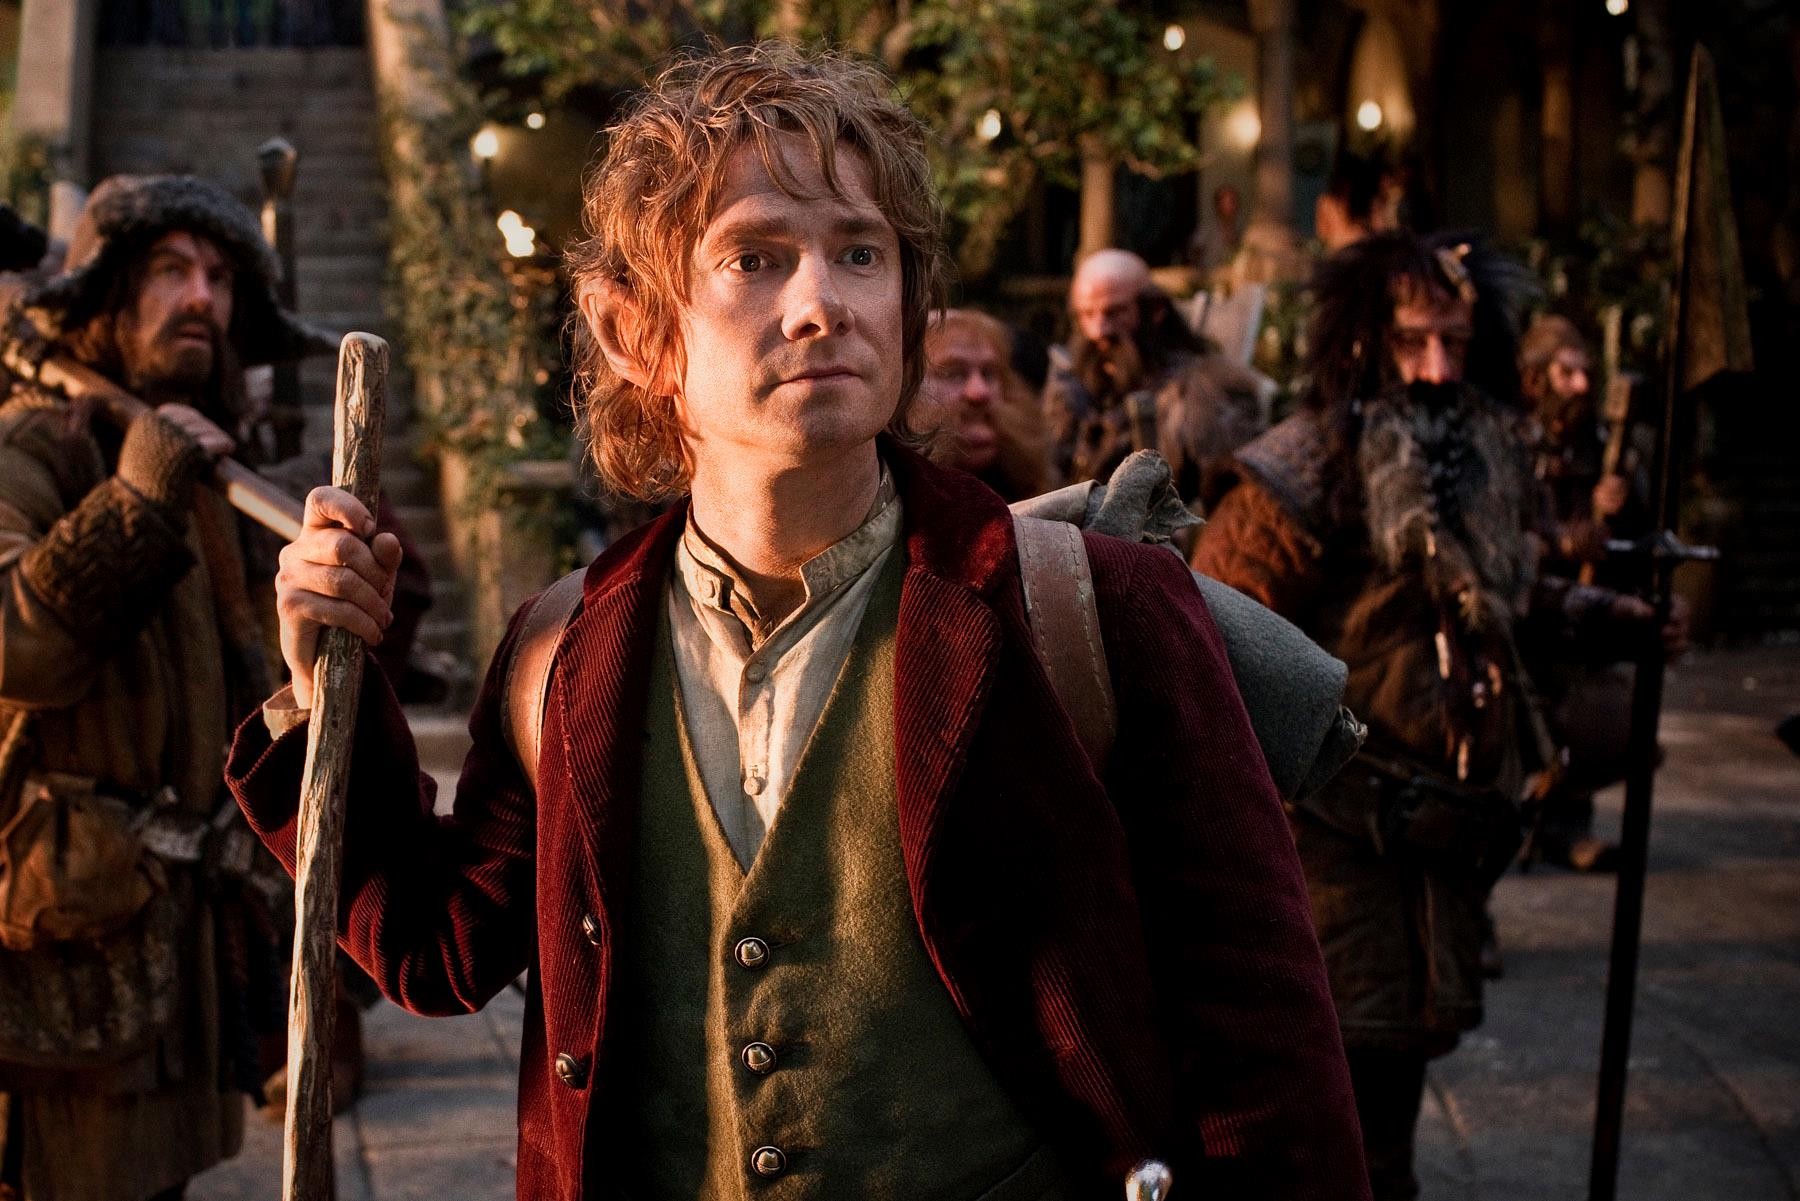 Movie The Hobbit: An Unexpected Journey Wallpaper